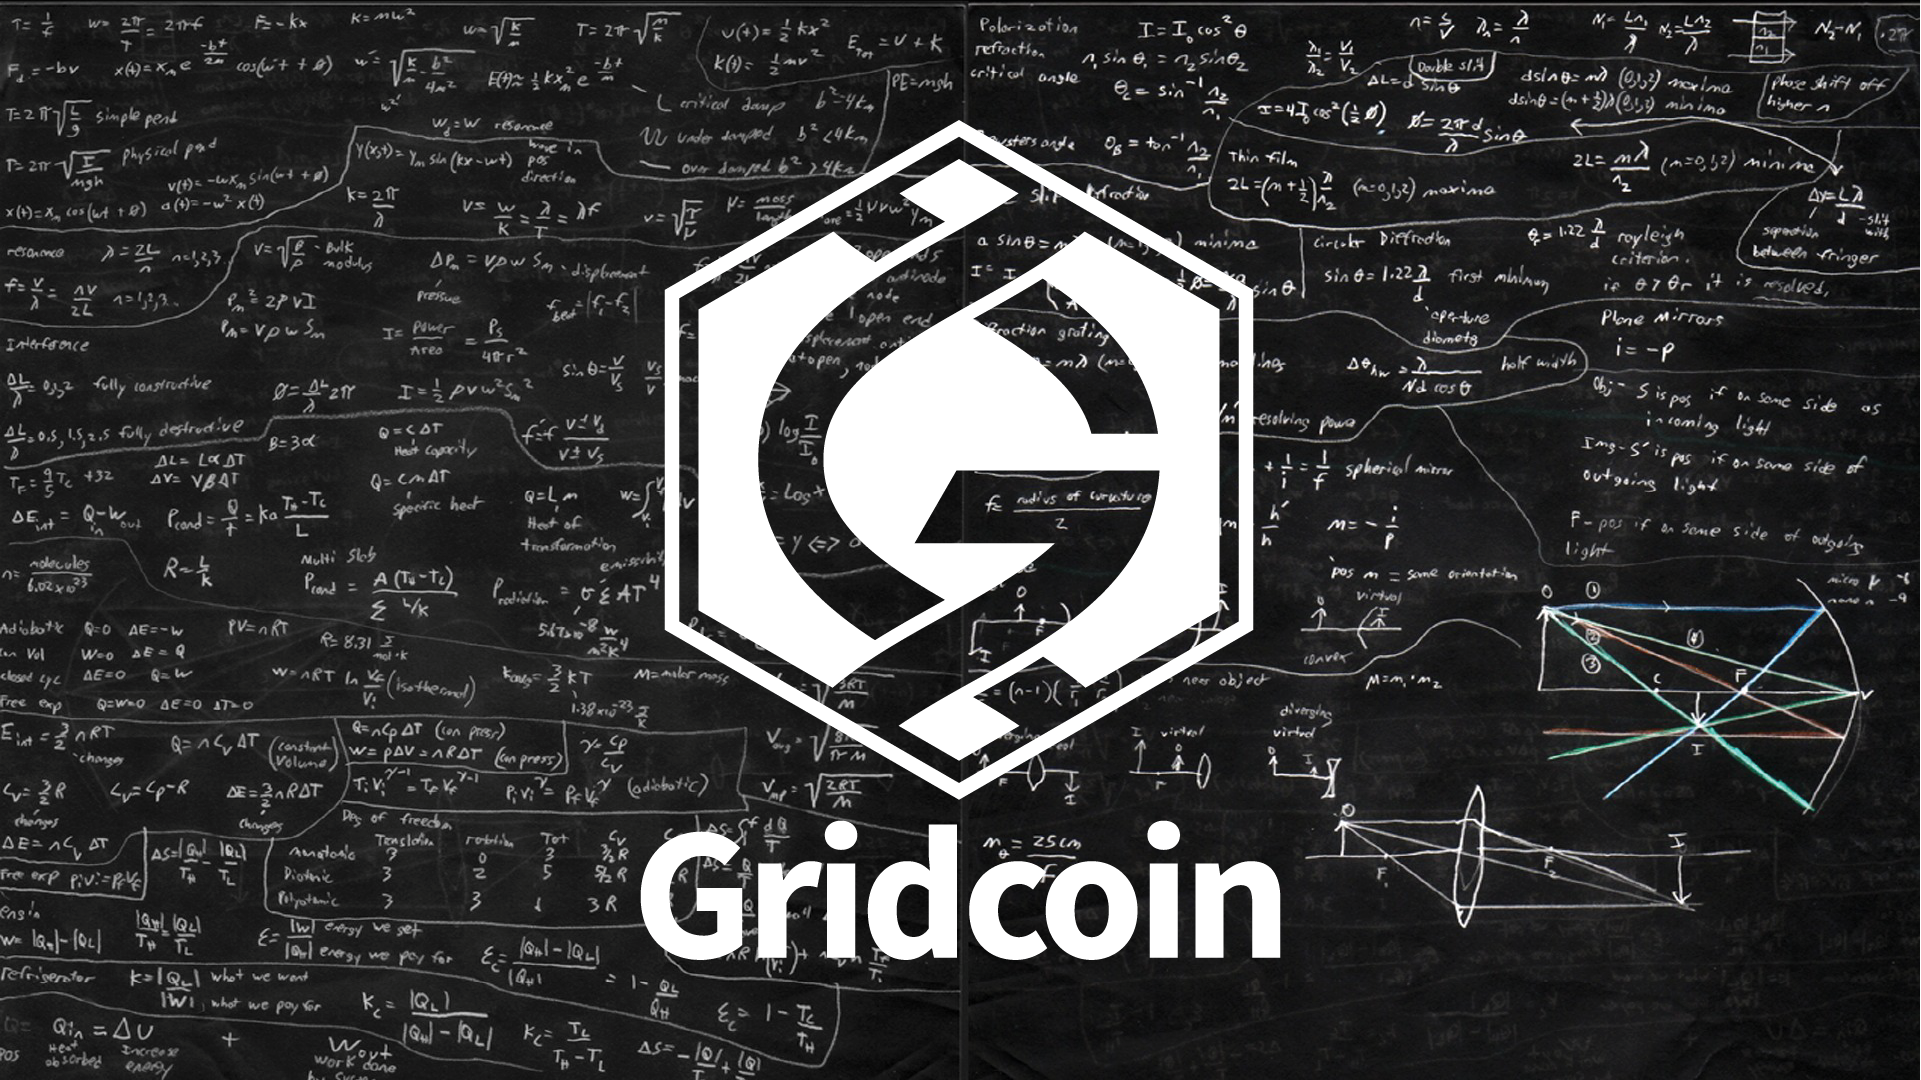 GridcoinBackgrounds-02.png